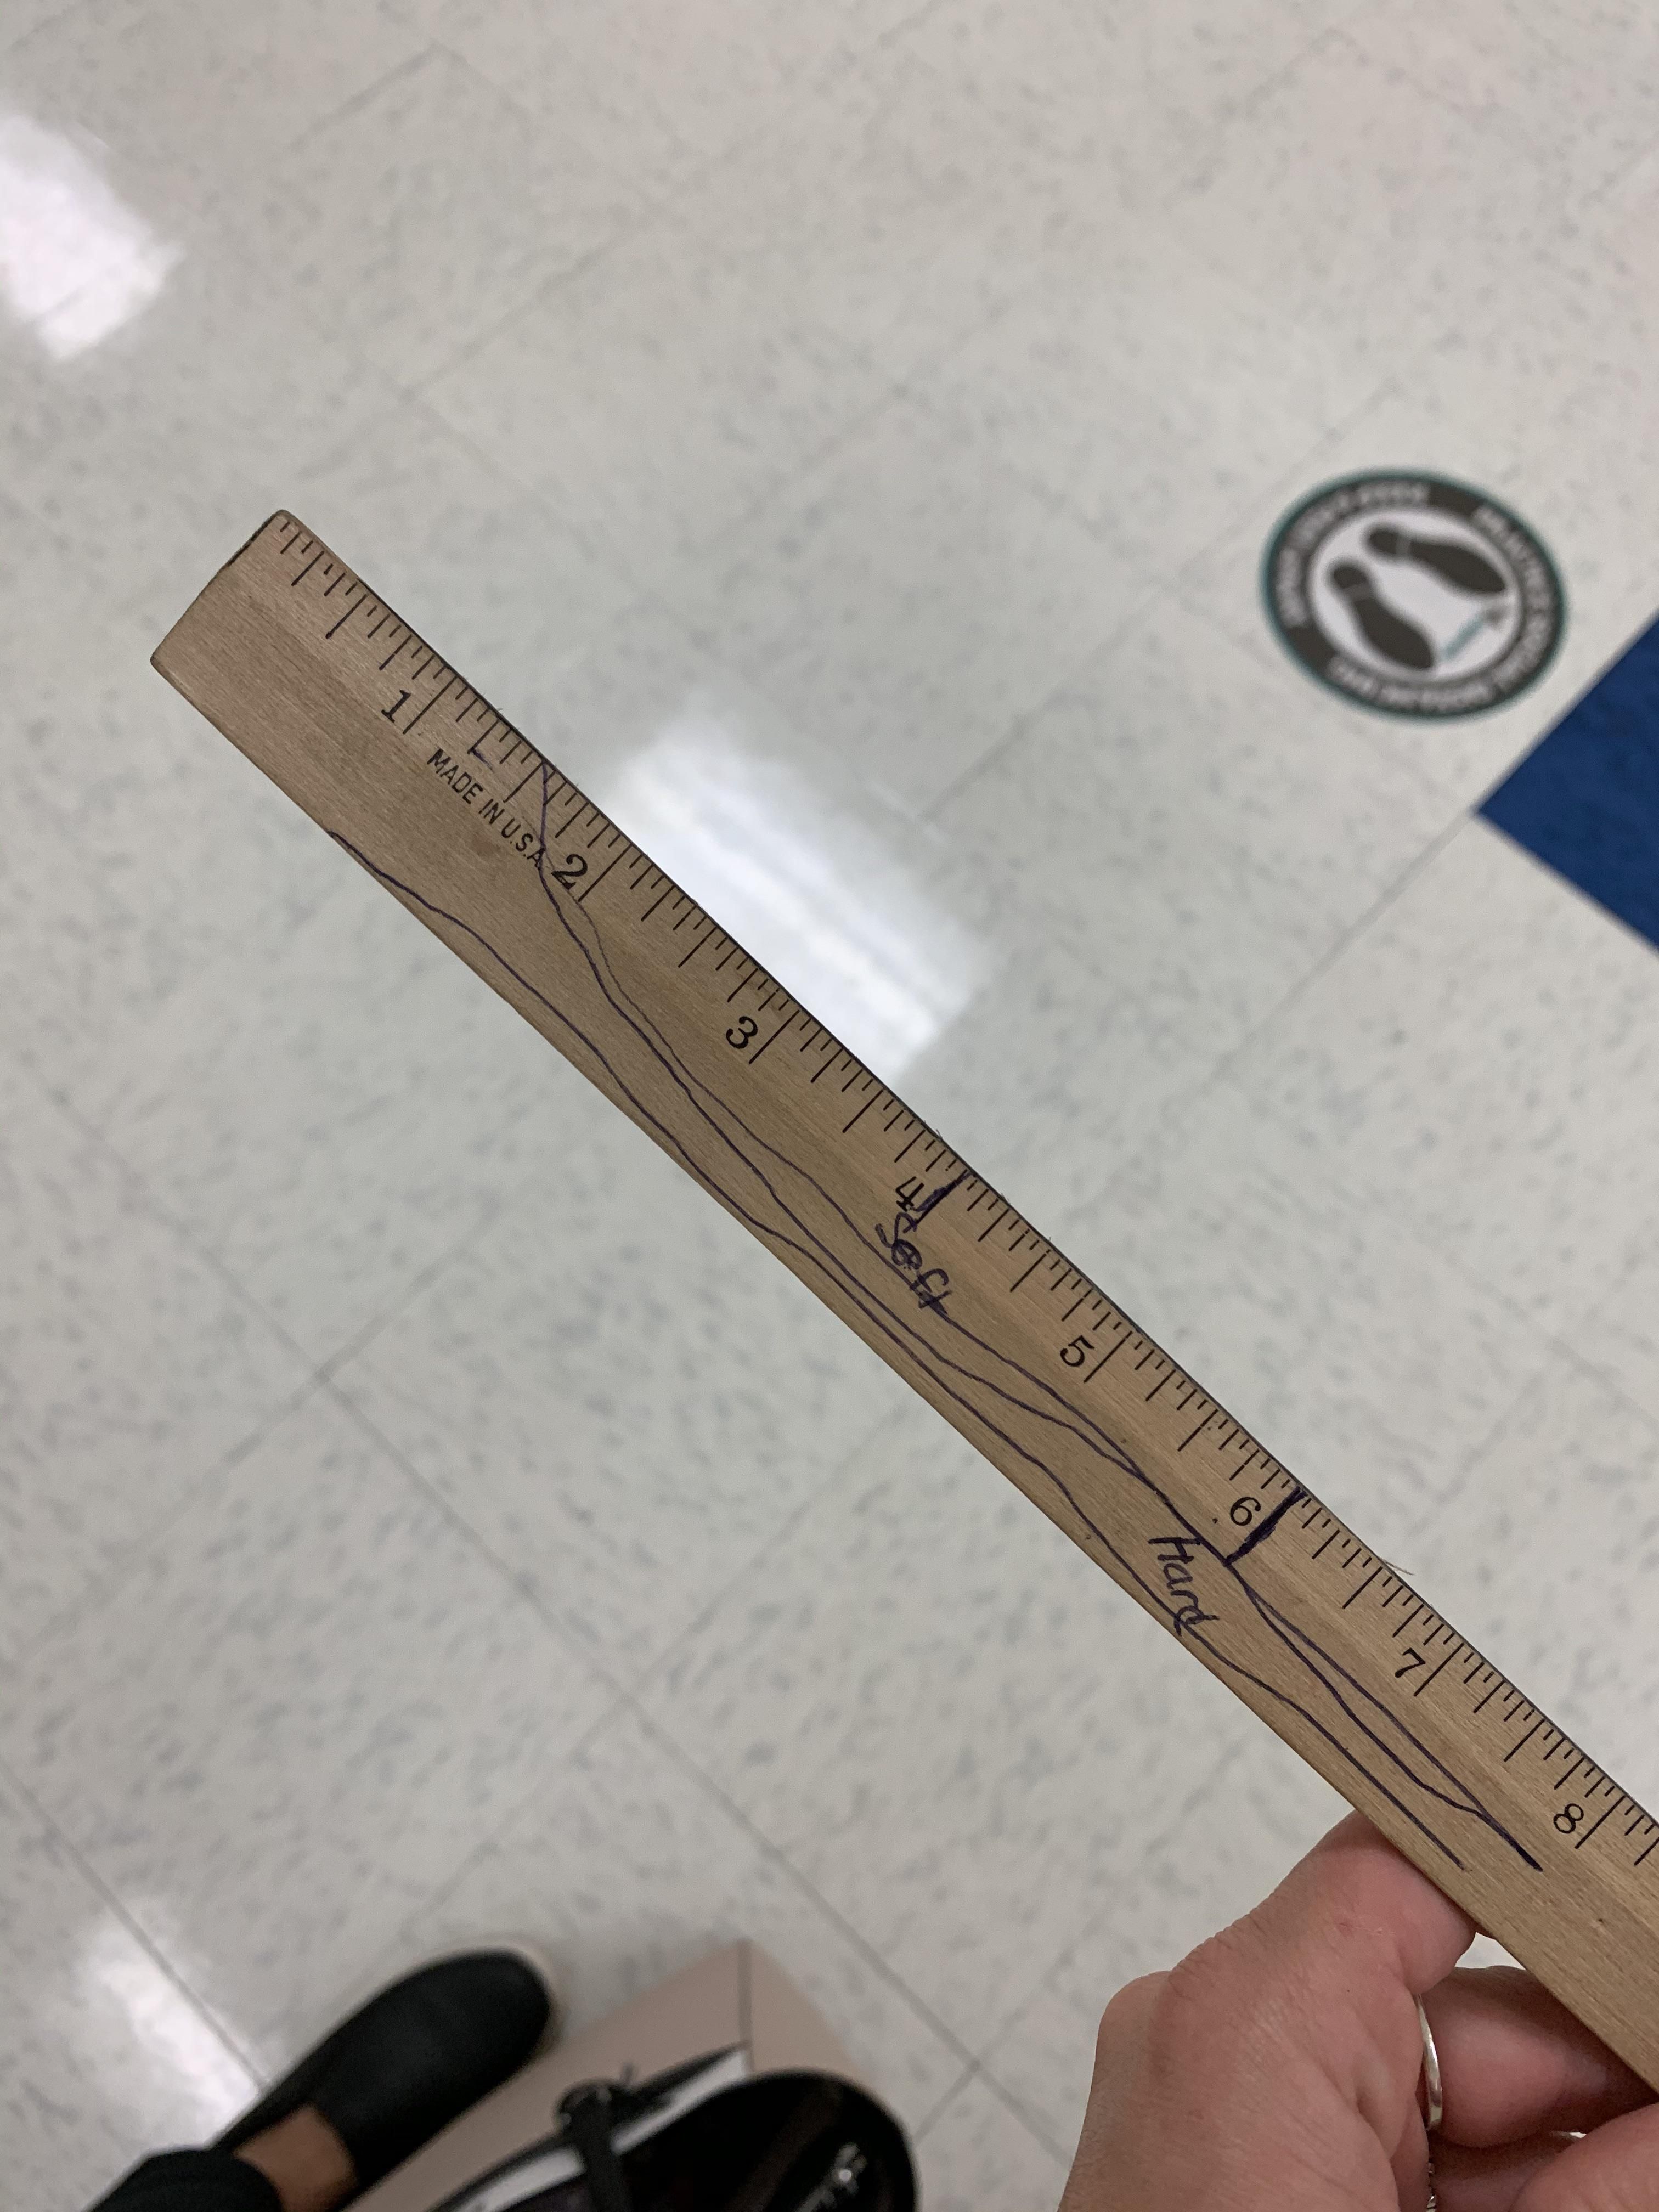 My friend is a middle school teacher and just sent me a picture of this ruler she found on her student’s desk...